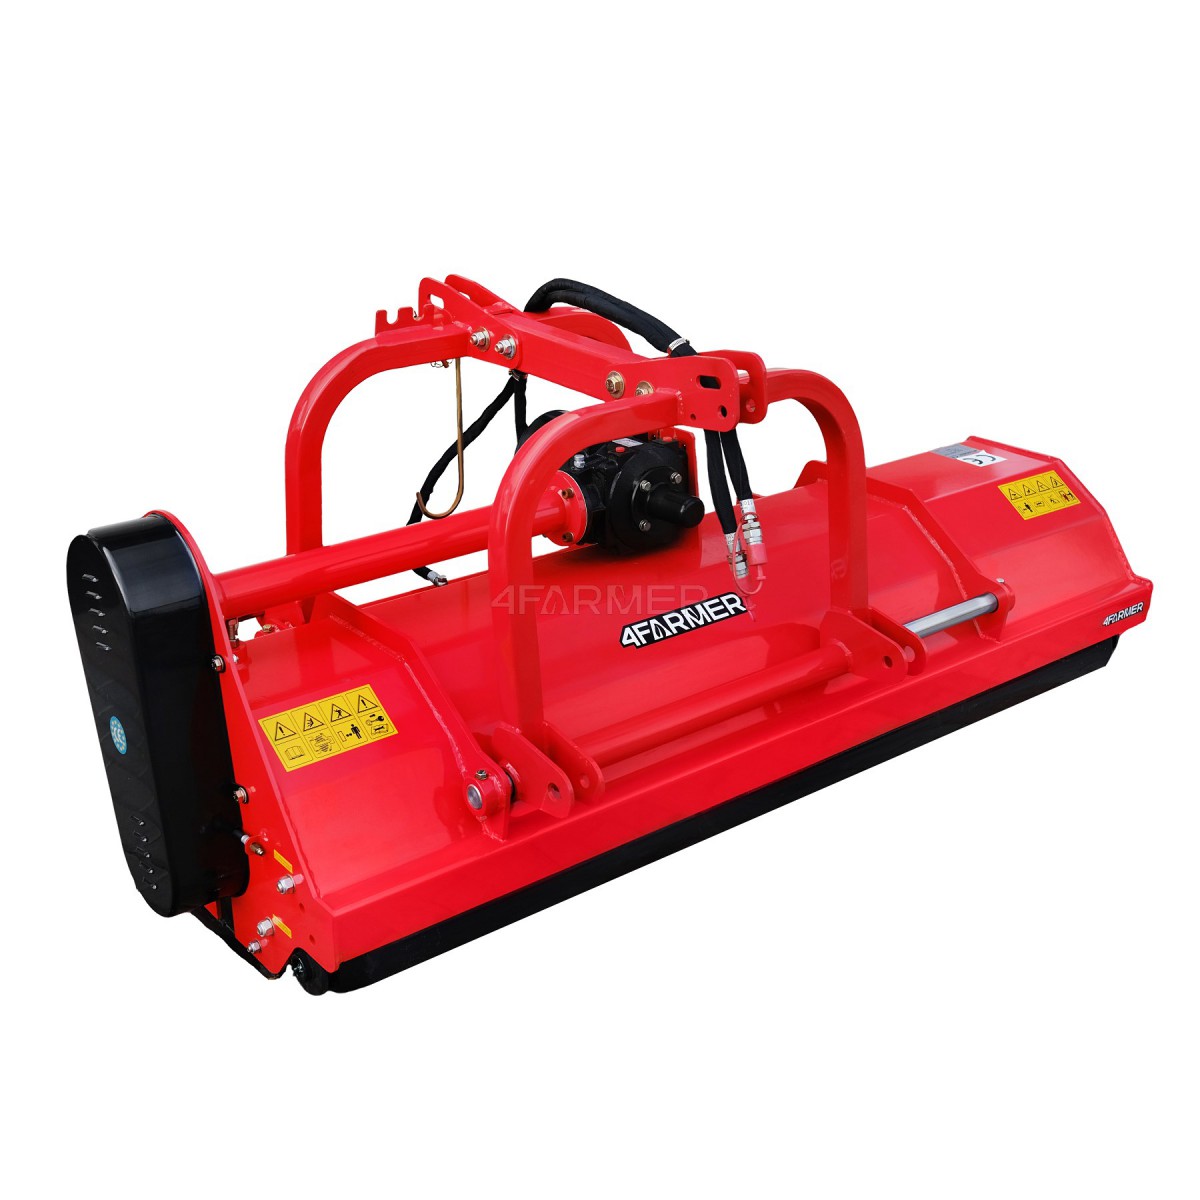 Flail mower with double-sided hydraulic shift AG 220 4FARMER